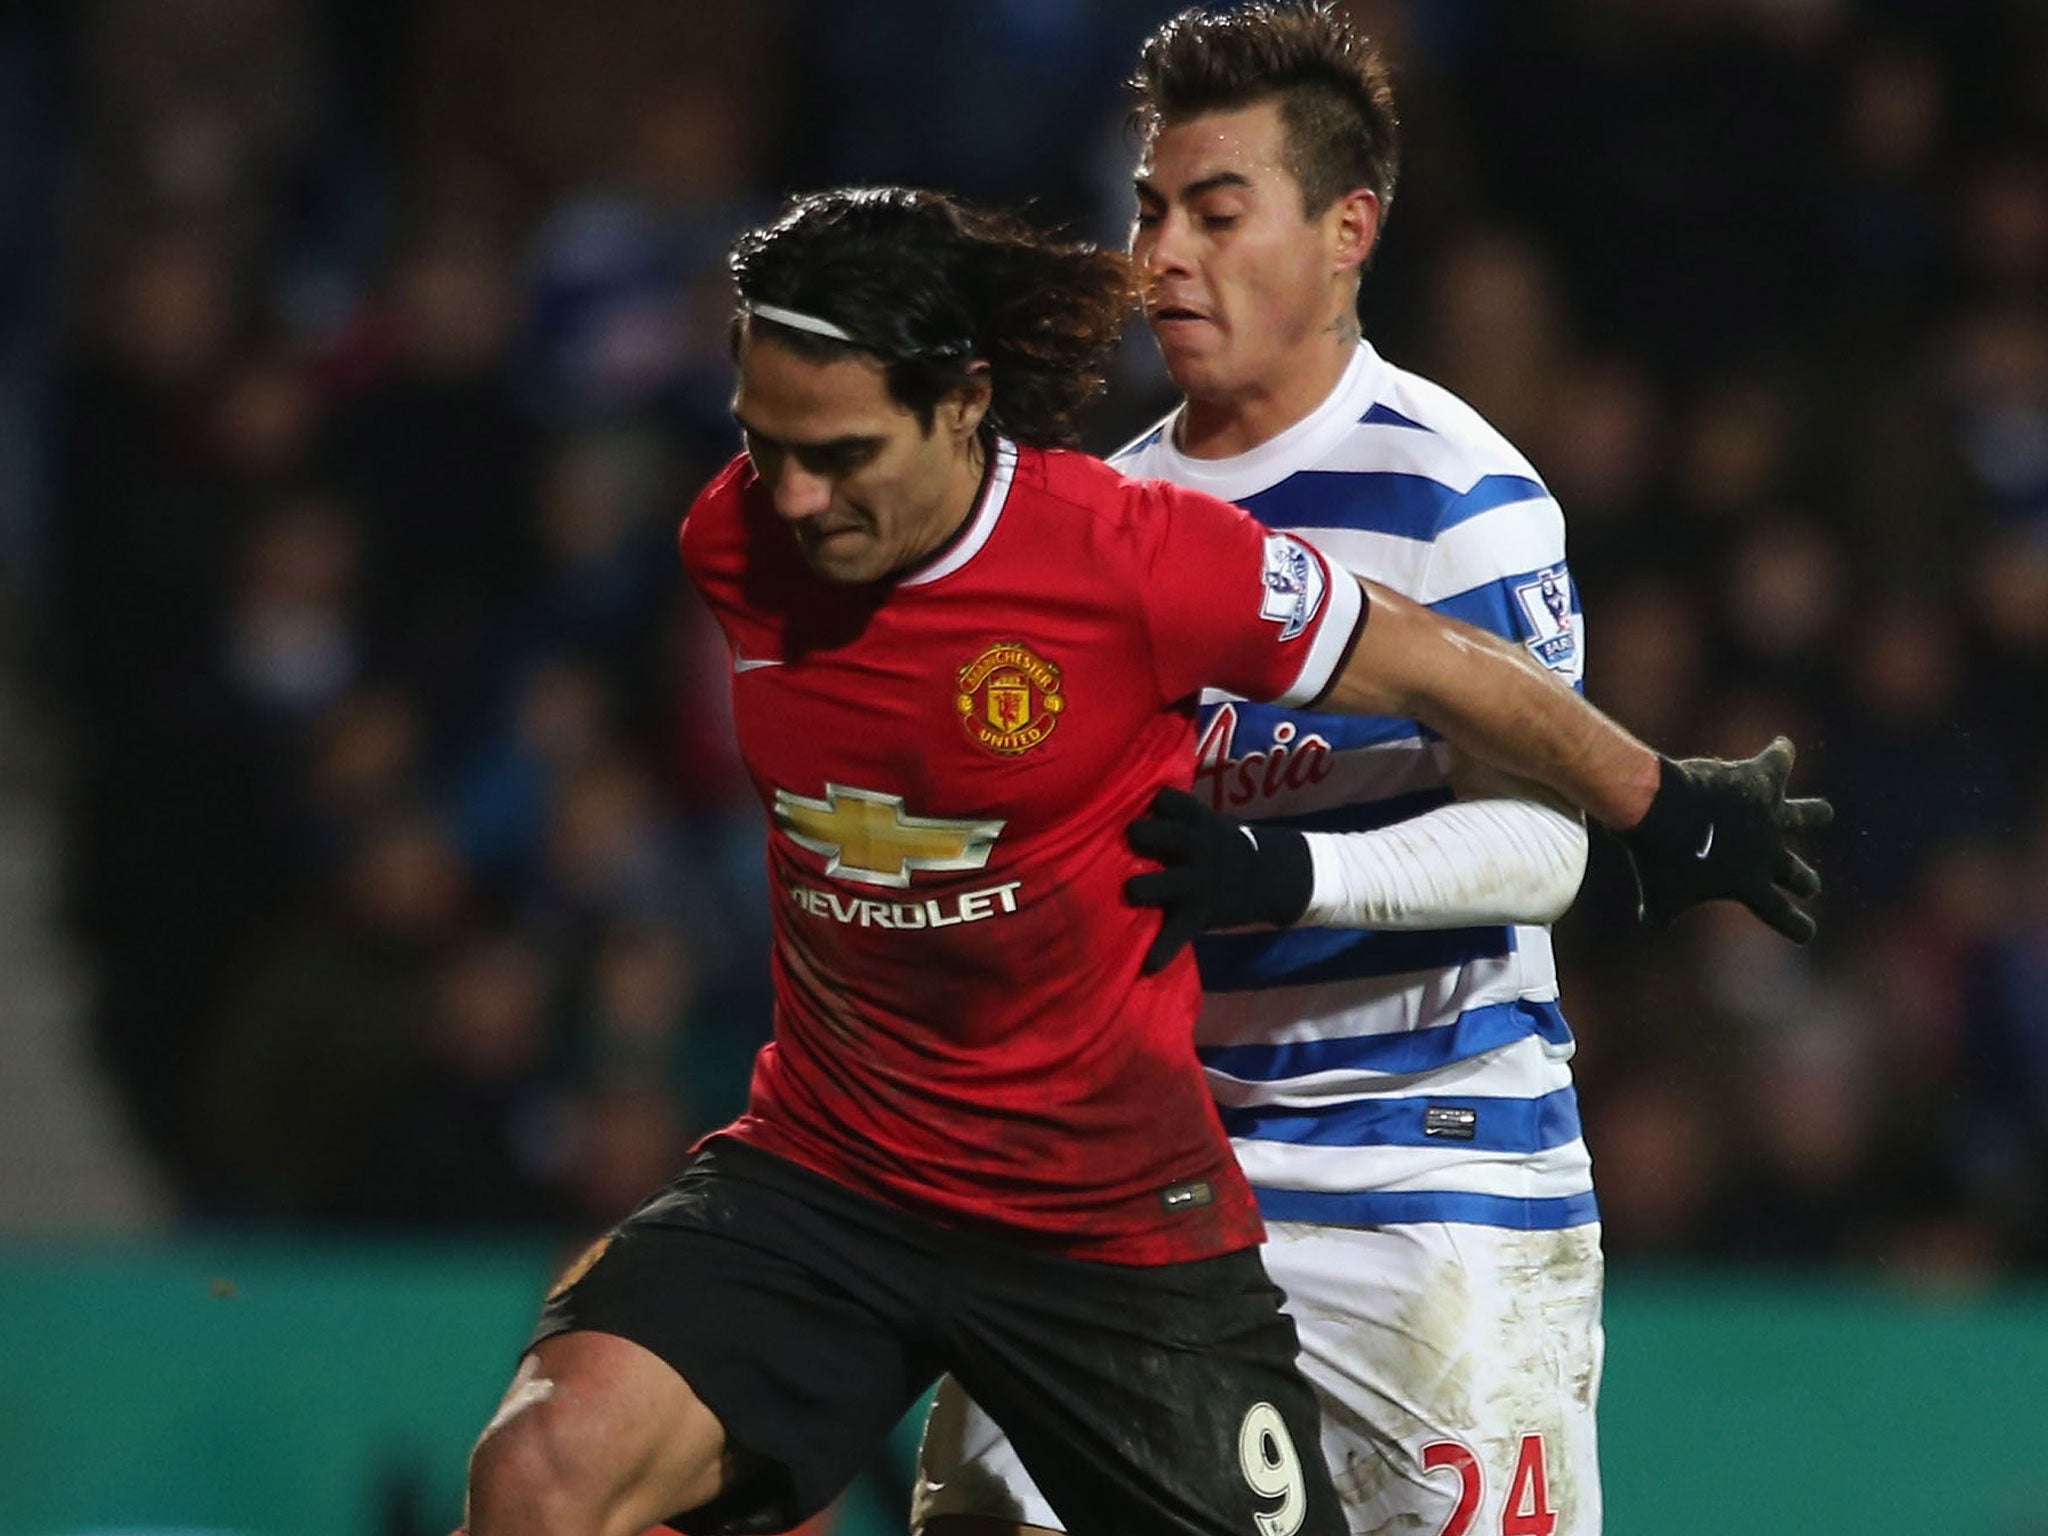 Radamel Falcao in action for Manchester United against QPR on Saturday